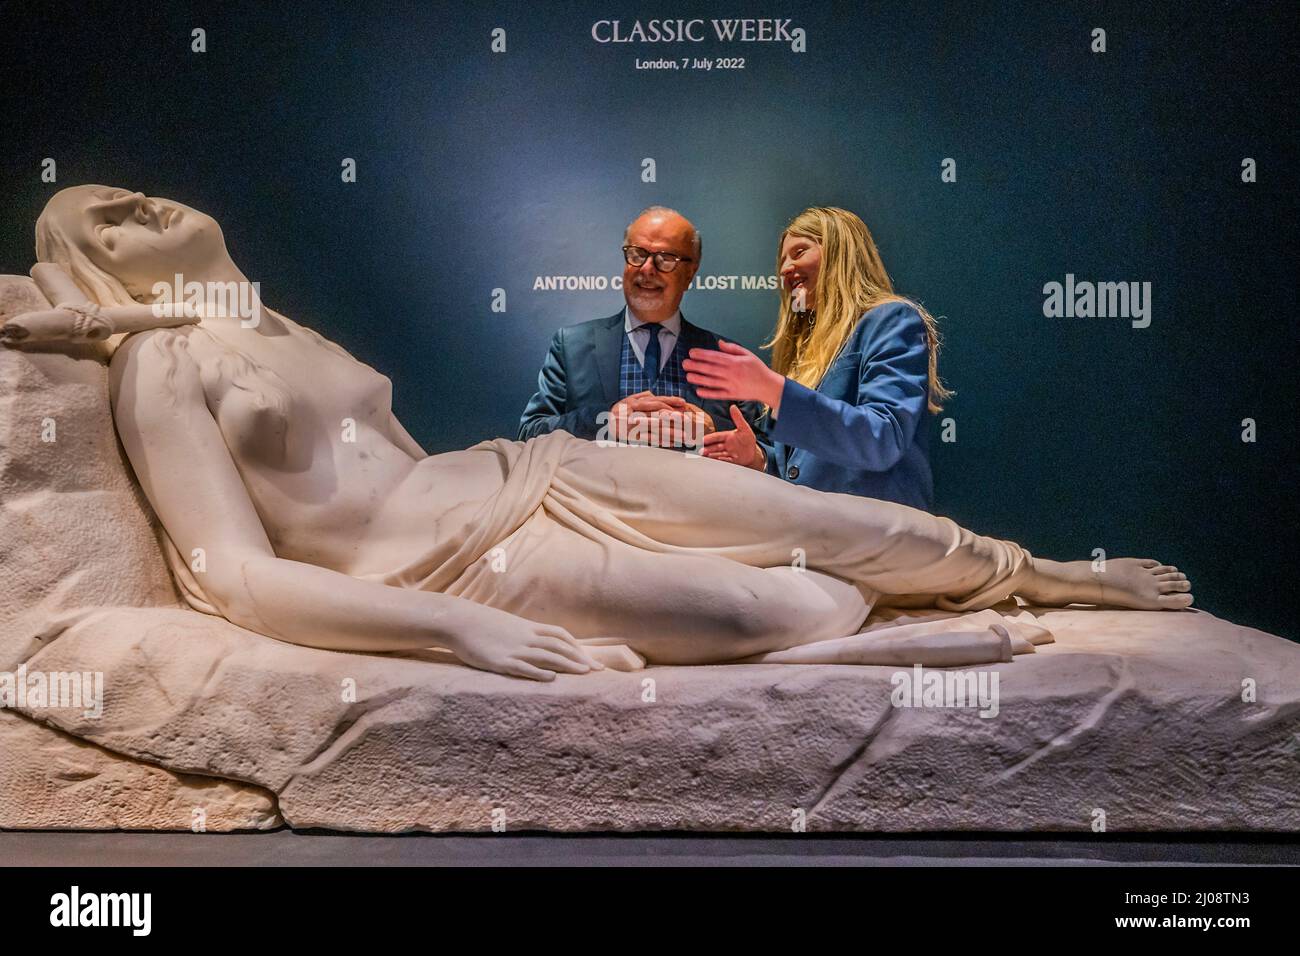 London, UK. 17 Mar 2022. Antonio Canova's (1757-1822) Maddalena Giacente (Recumbent Magdalene) 1819-1822, is the Italian titan's lost masterpiece, which he completed shortly before his death (estimate: £5,000,000-8,000,000). With Dr. Mario Guderzo, leading Canova scholar, former Director of the Museo Gypsotheca Antonio Canova and Museo Biblioteca Archivio di Bassano del Grappa and Scarlett Walsh, Christie's Junior Specialist, Sculpture. The sculpture of Mary Magdalene in a state of ecstasy was commissioned by the Prime Minister of the day, Lord Liverpool (1812-1827). It will be a star lot duri Stock Photo